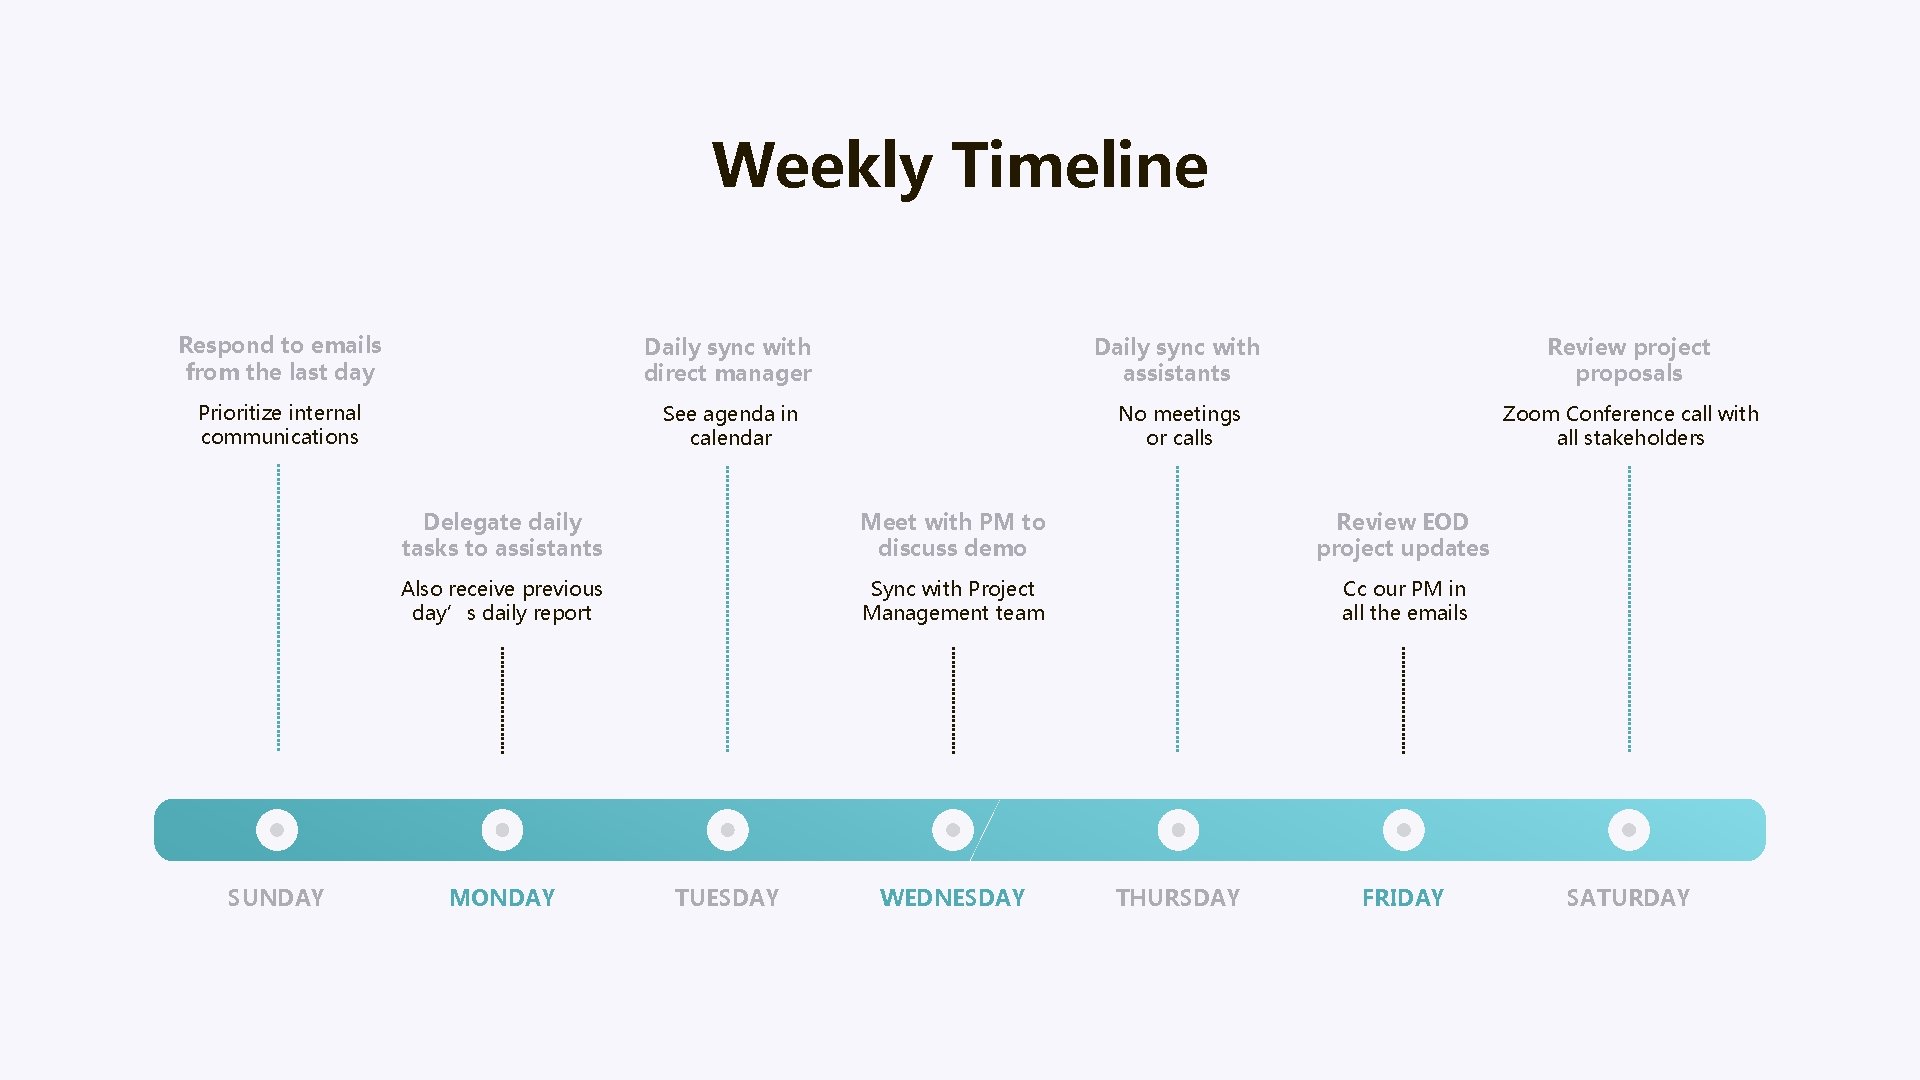 Weekly Timeline Respond to emails from the last day Daily sync with direct manager